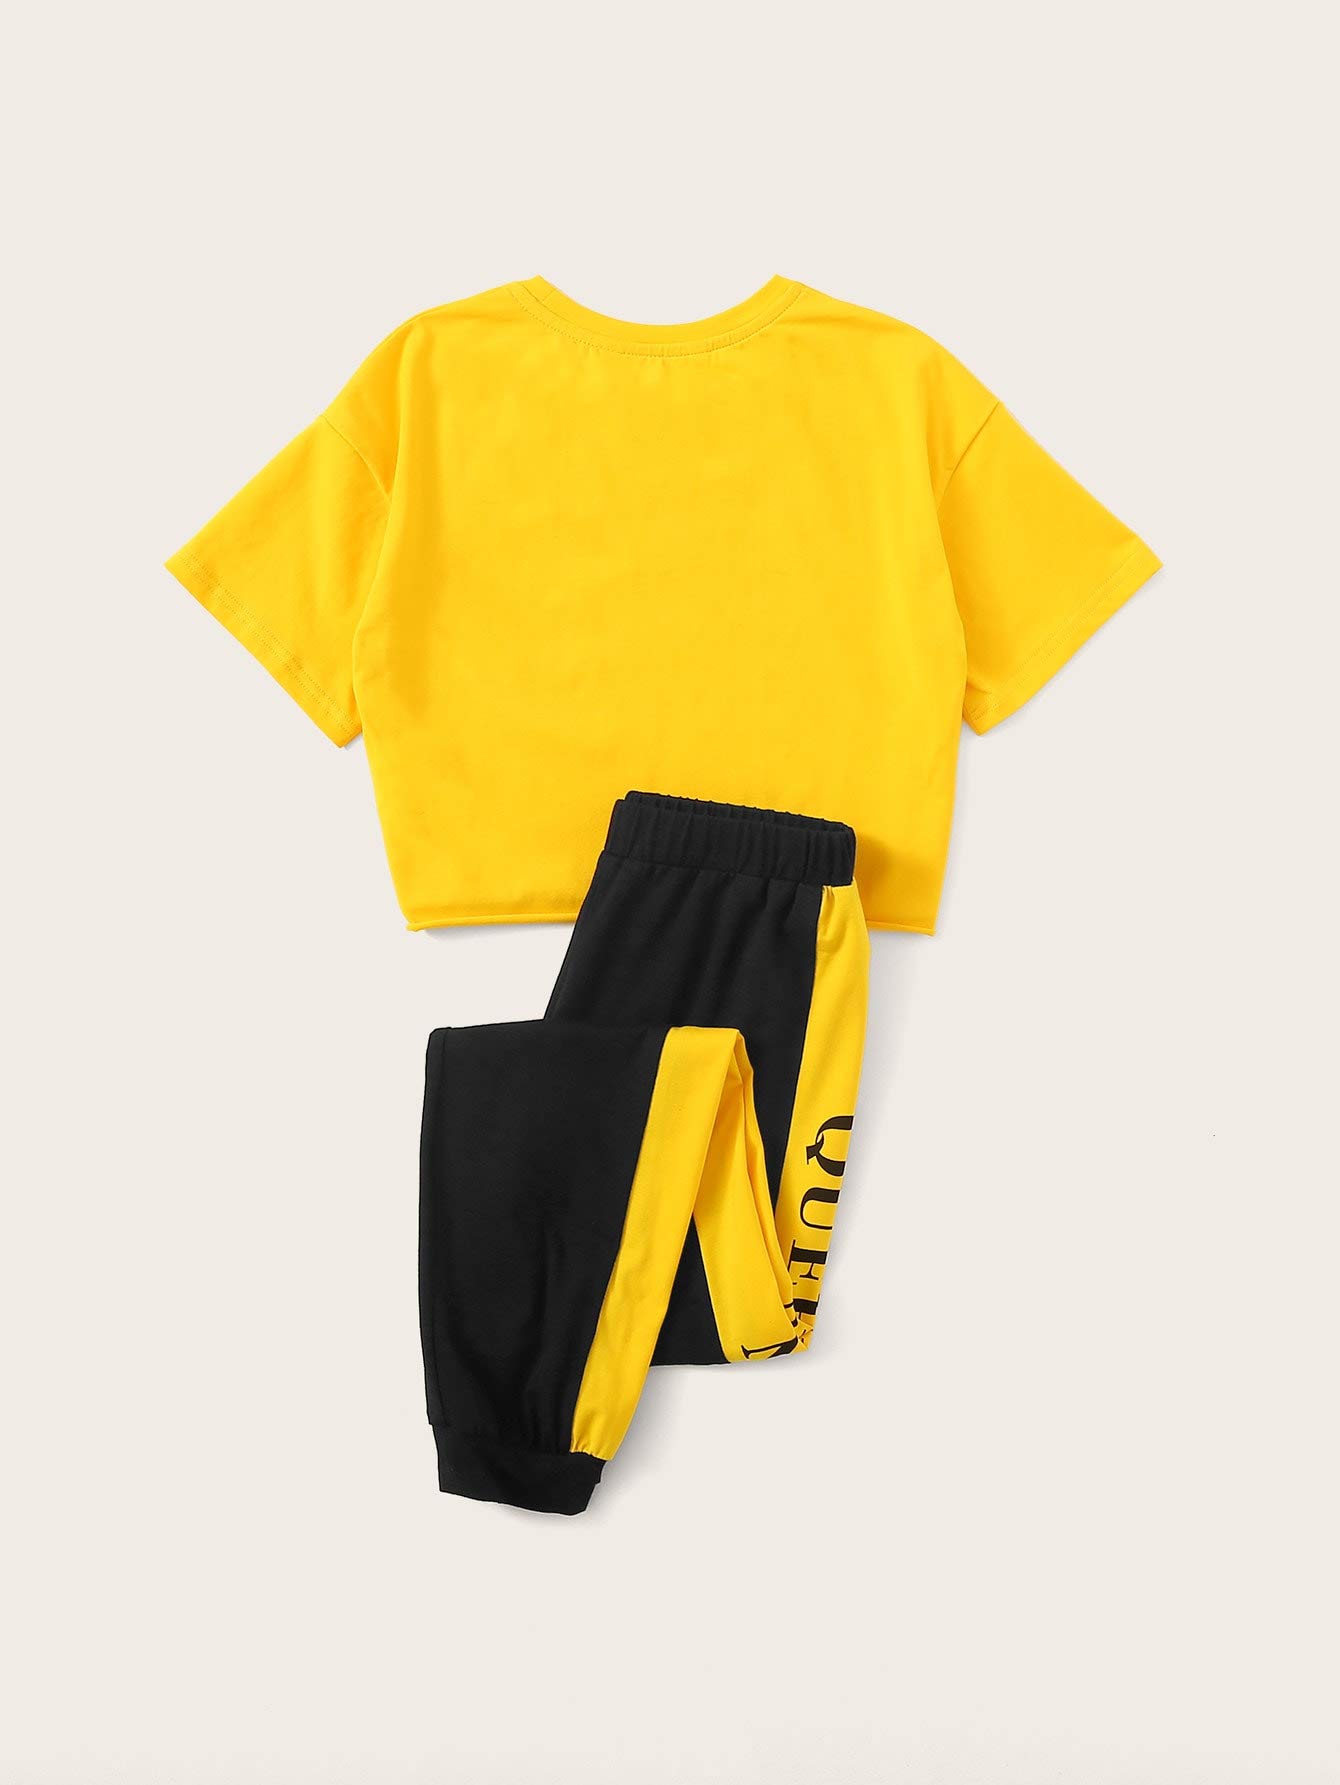 Floerns Girls 2 Piece Letter Graphic Short Sleeve Crop Top and Legging Set Yellow and Black 10Y